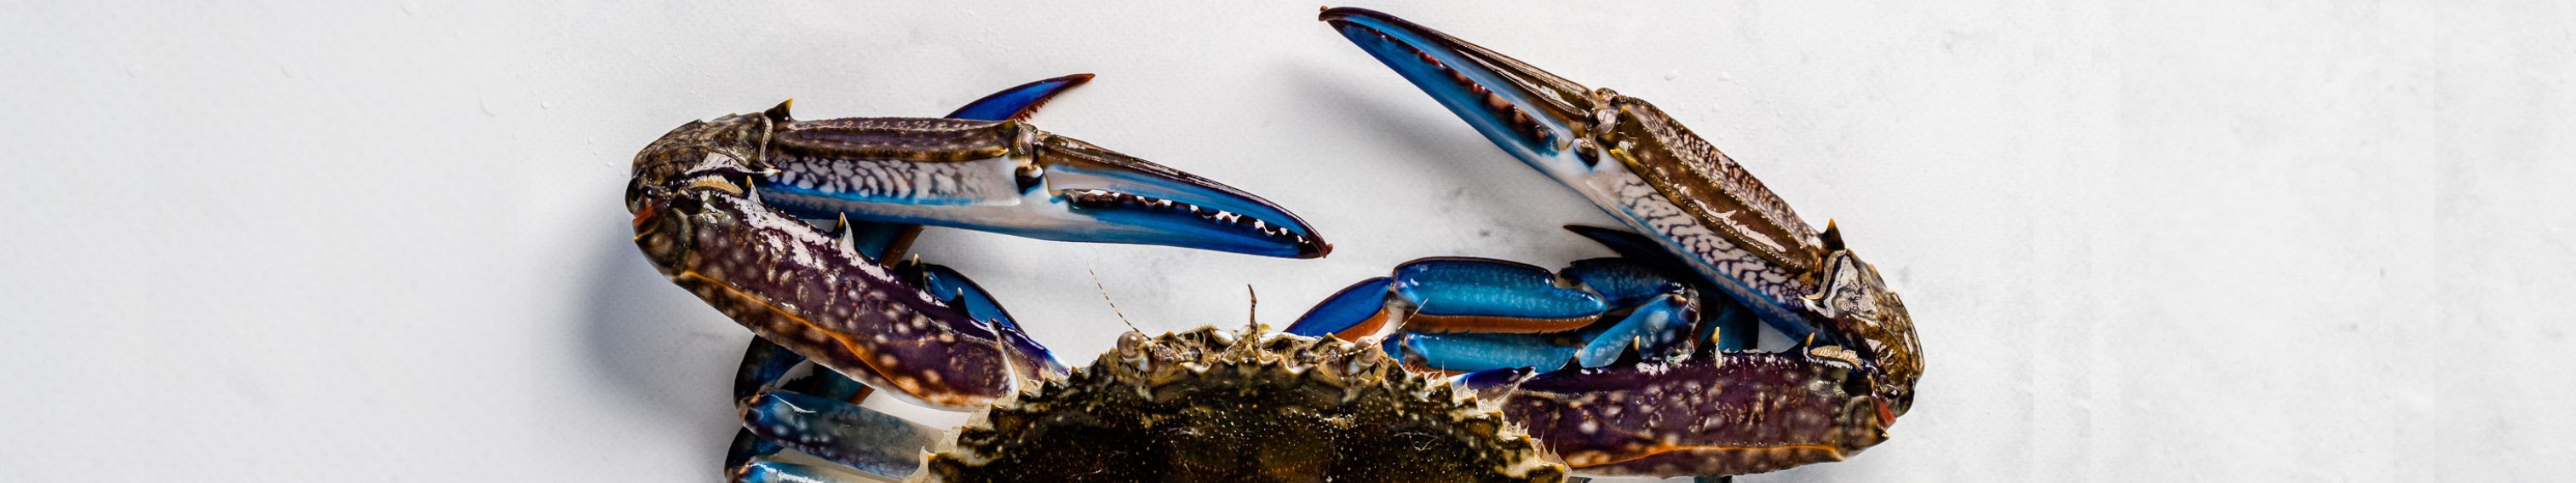 Blue Swimmer Crab with Black Pepper RECIPE from steve costi seafood